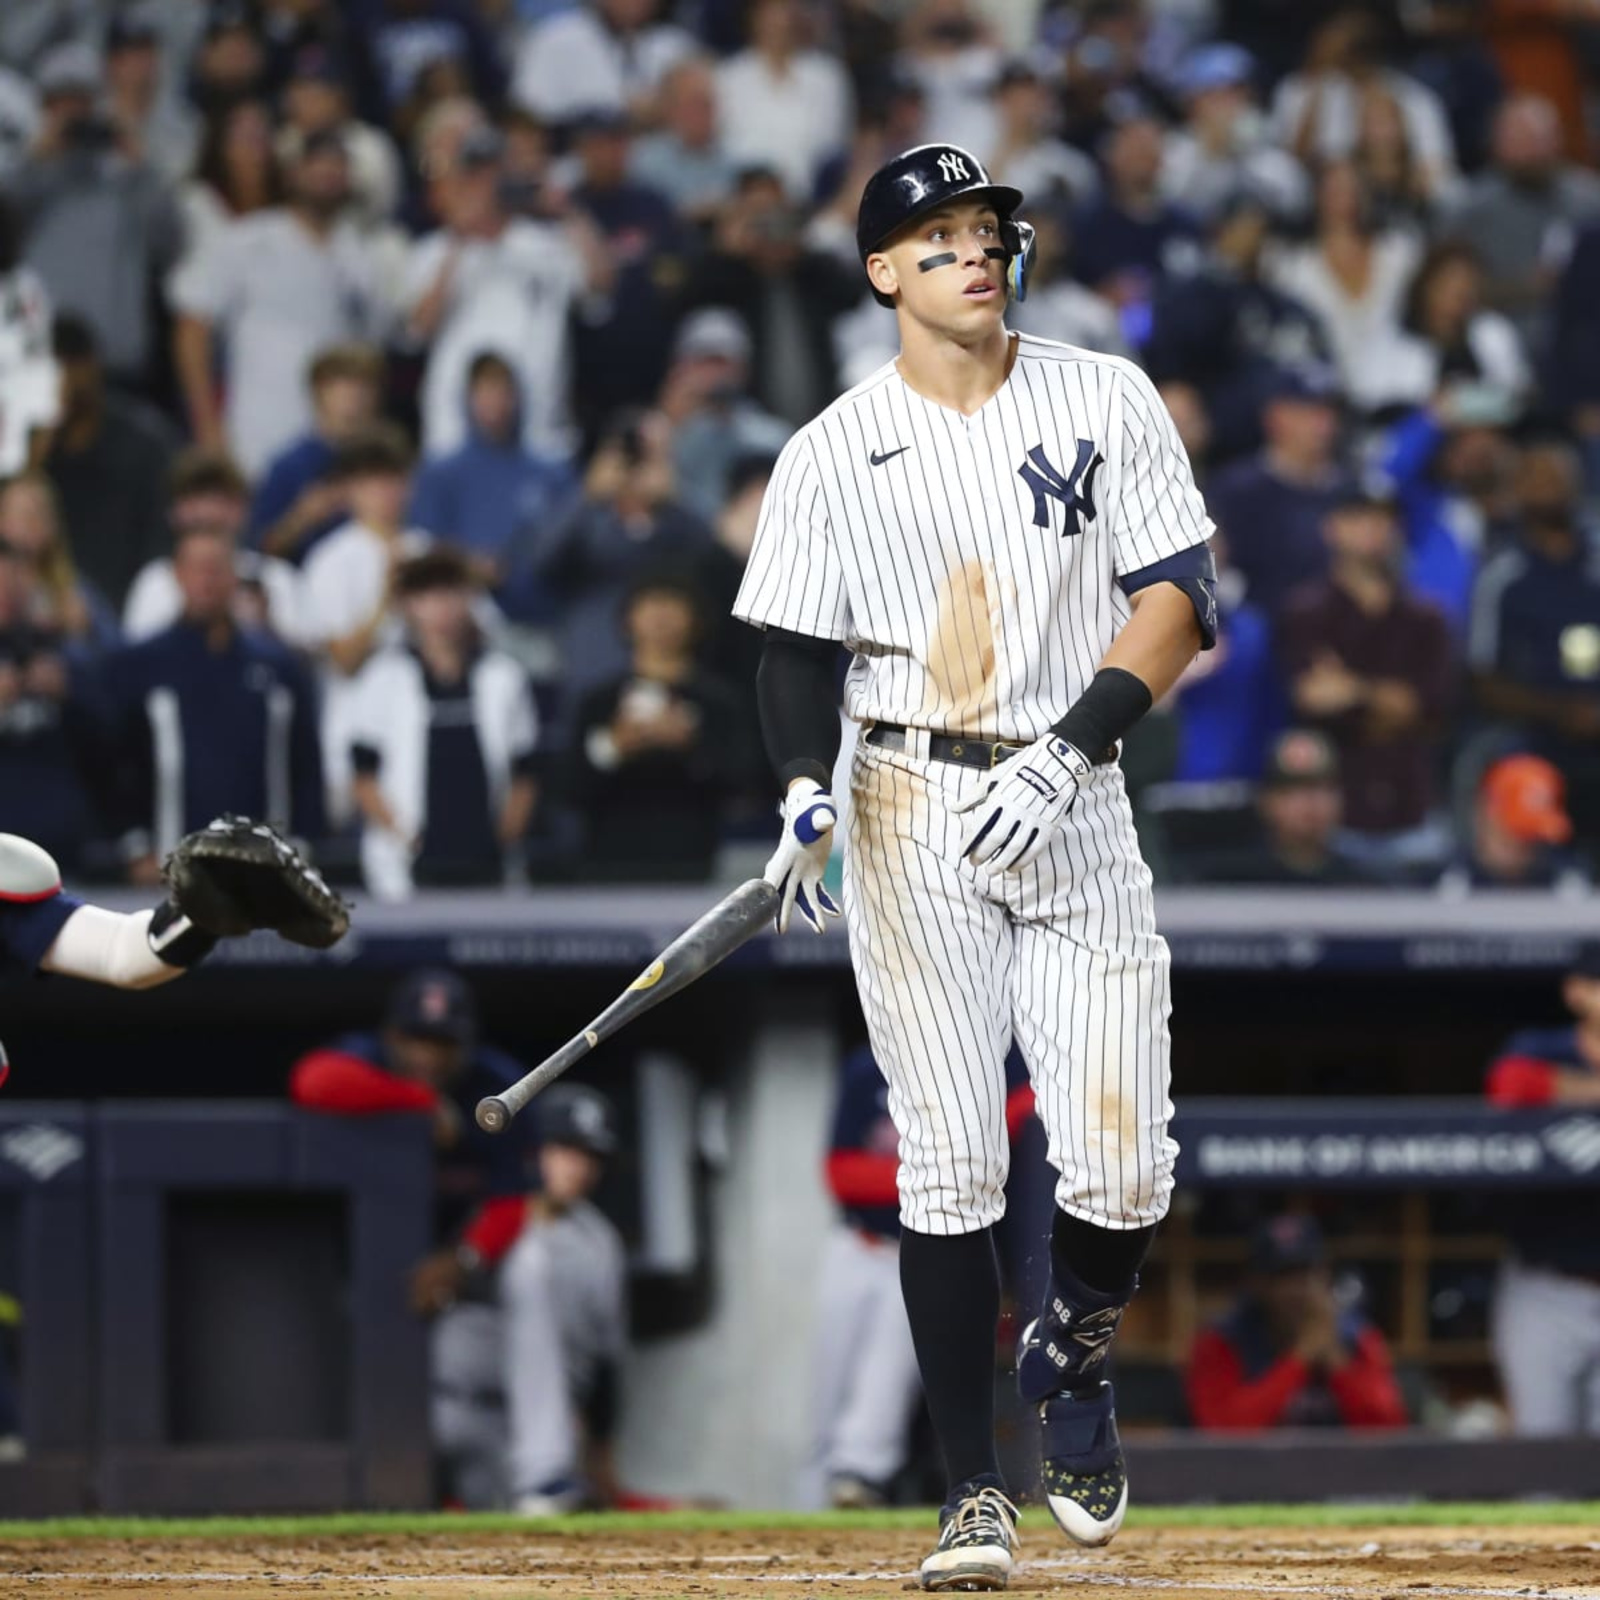 New York Yankees and Aaron Judge reportedly agree on nine-year deal worth  $360 million